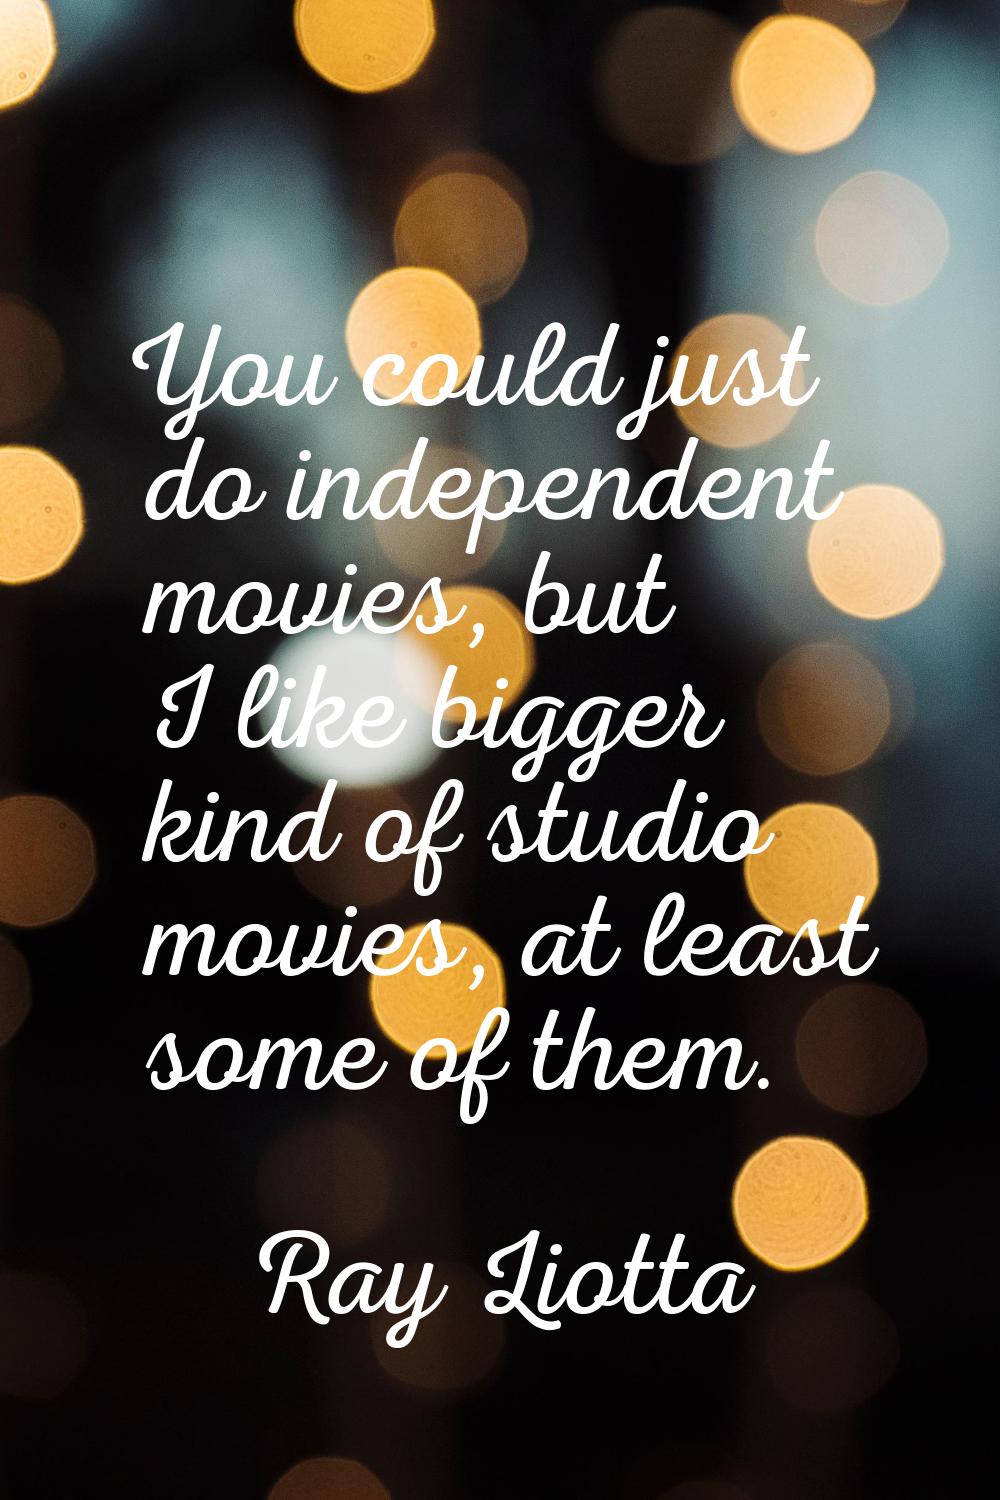 You could just do independent movies, but I like bigger kind of studio movies, at least some of the